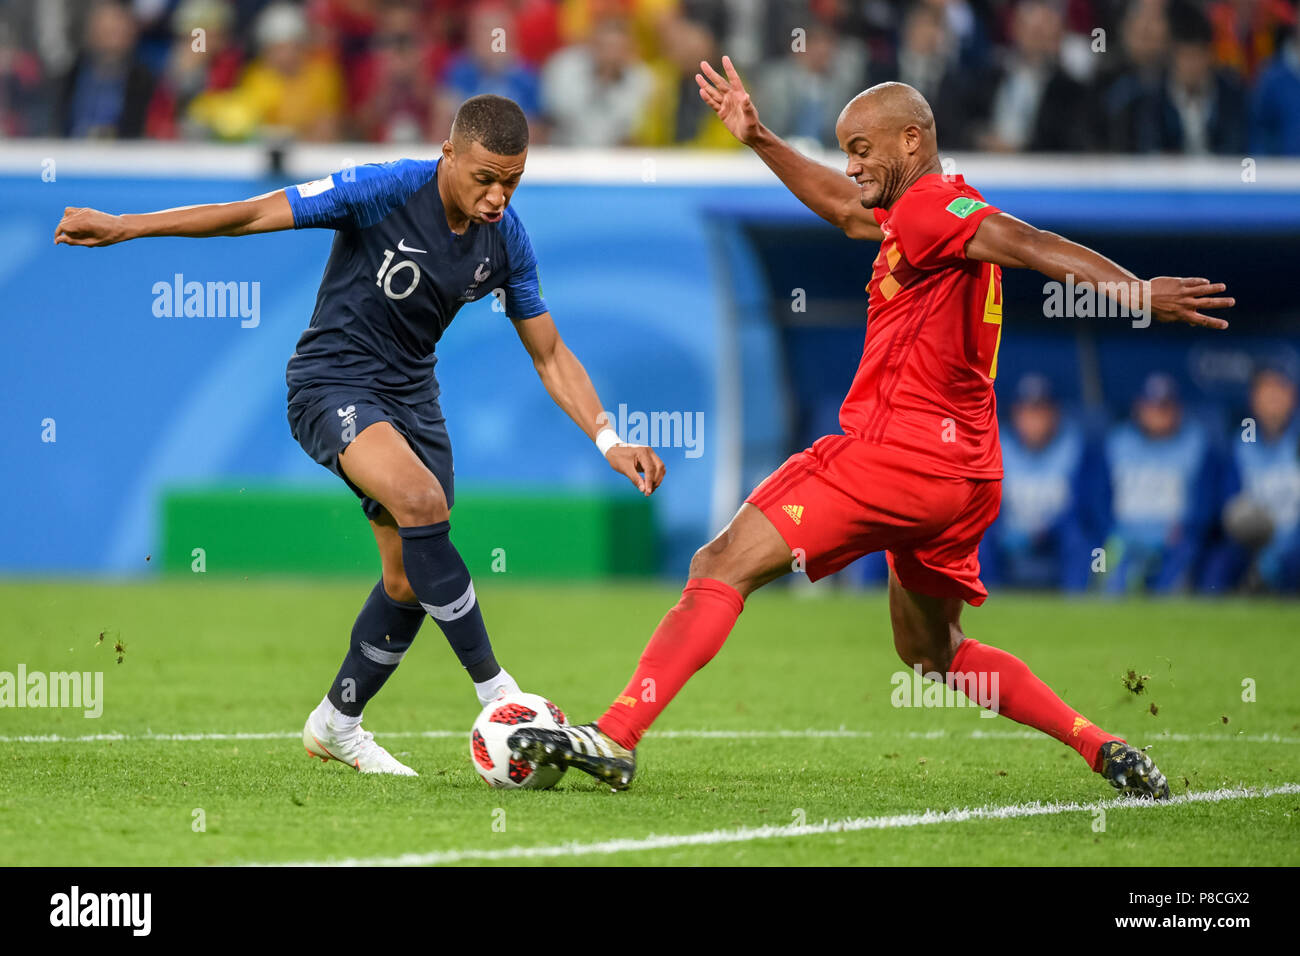 St. 10th July, 2018. Vincent Kompany of Belgium tackling Kylian Mbappe of France at St. Petersbourg Stadium during the semi finals between France and Belgium during the 2018 World Cup. Ulrik Pedersen/CSM/Alamy Live News Stock Photo